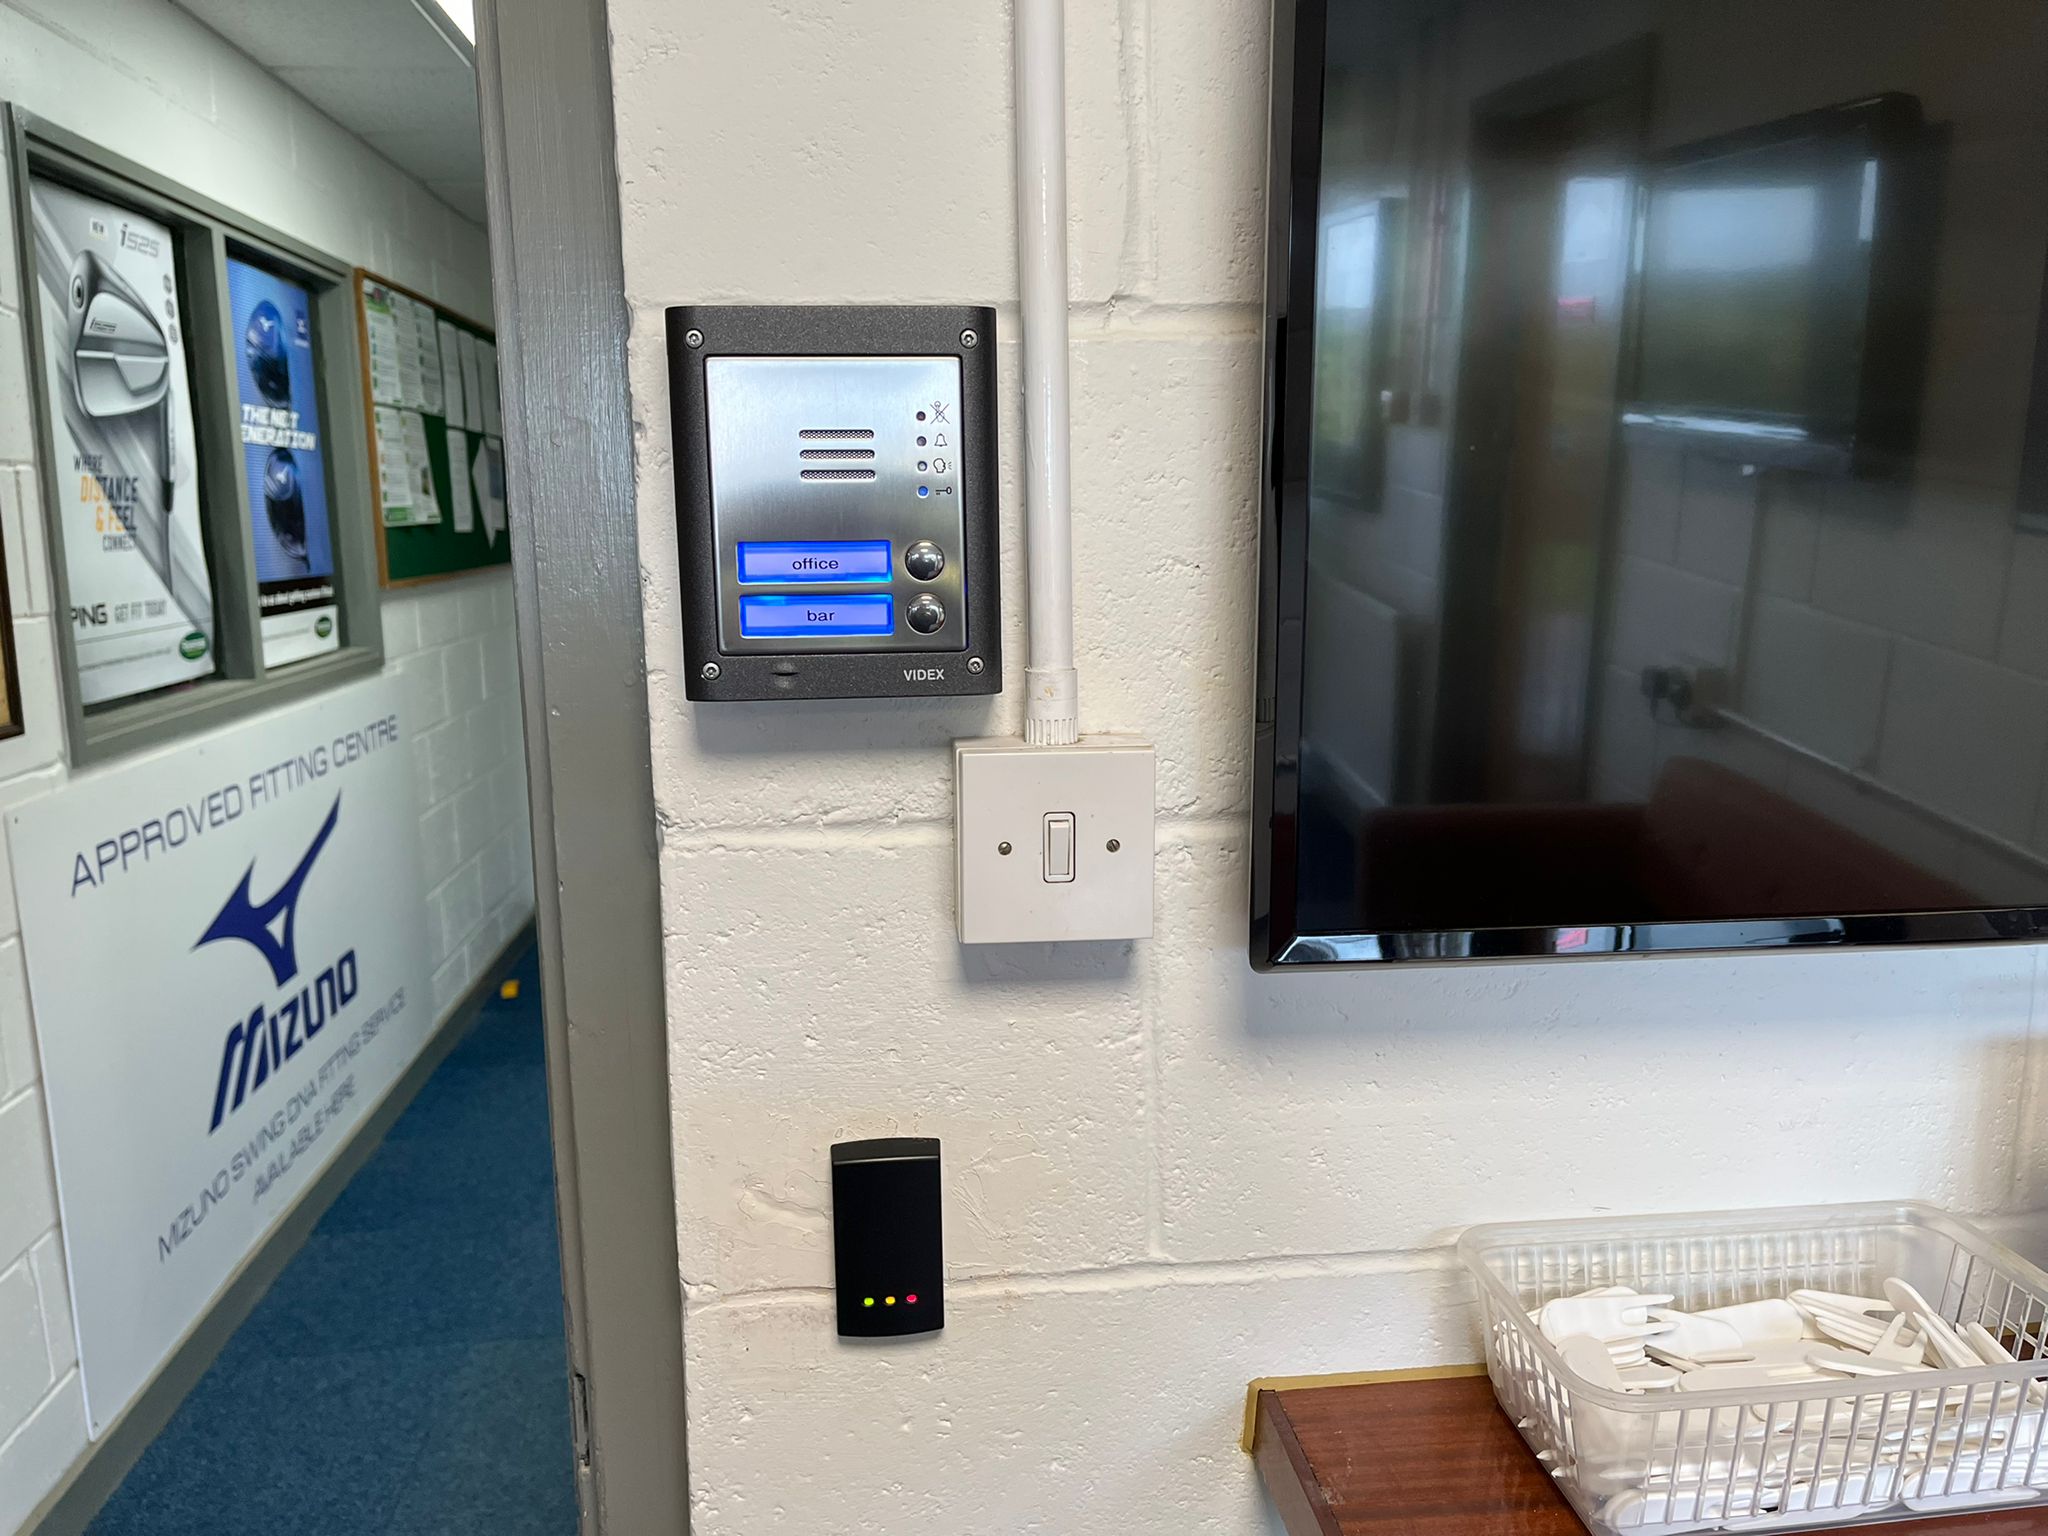 Shirehampton Park Golf Club installs new state of the art security system